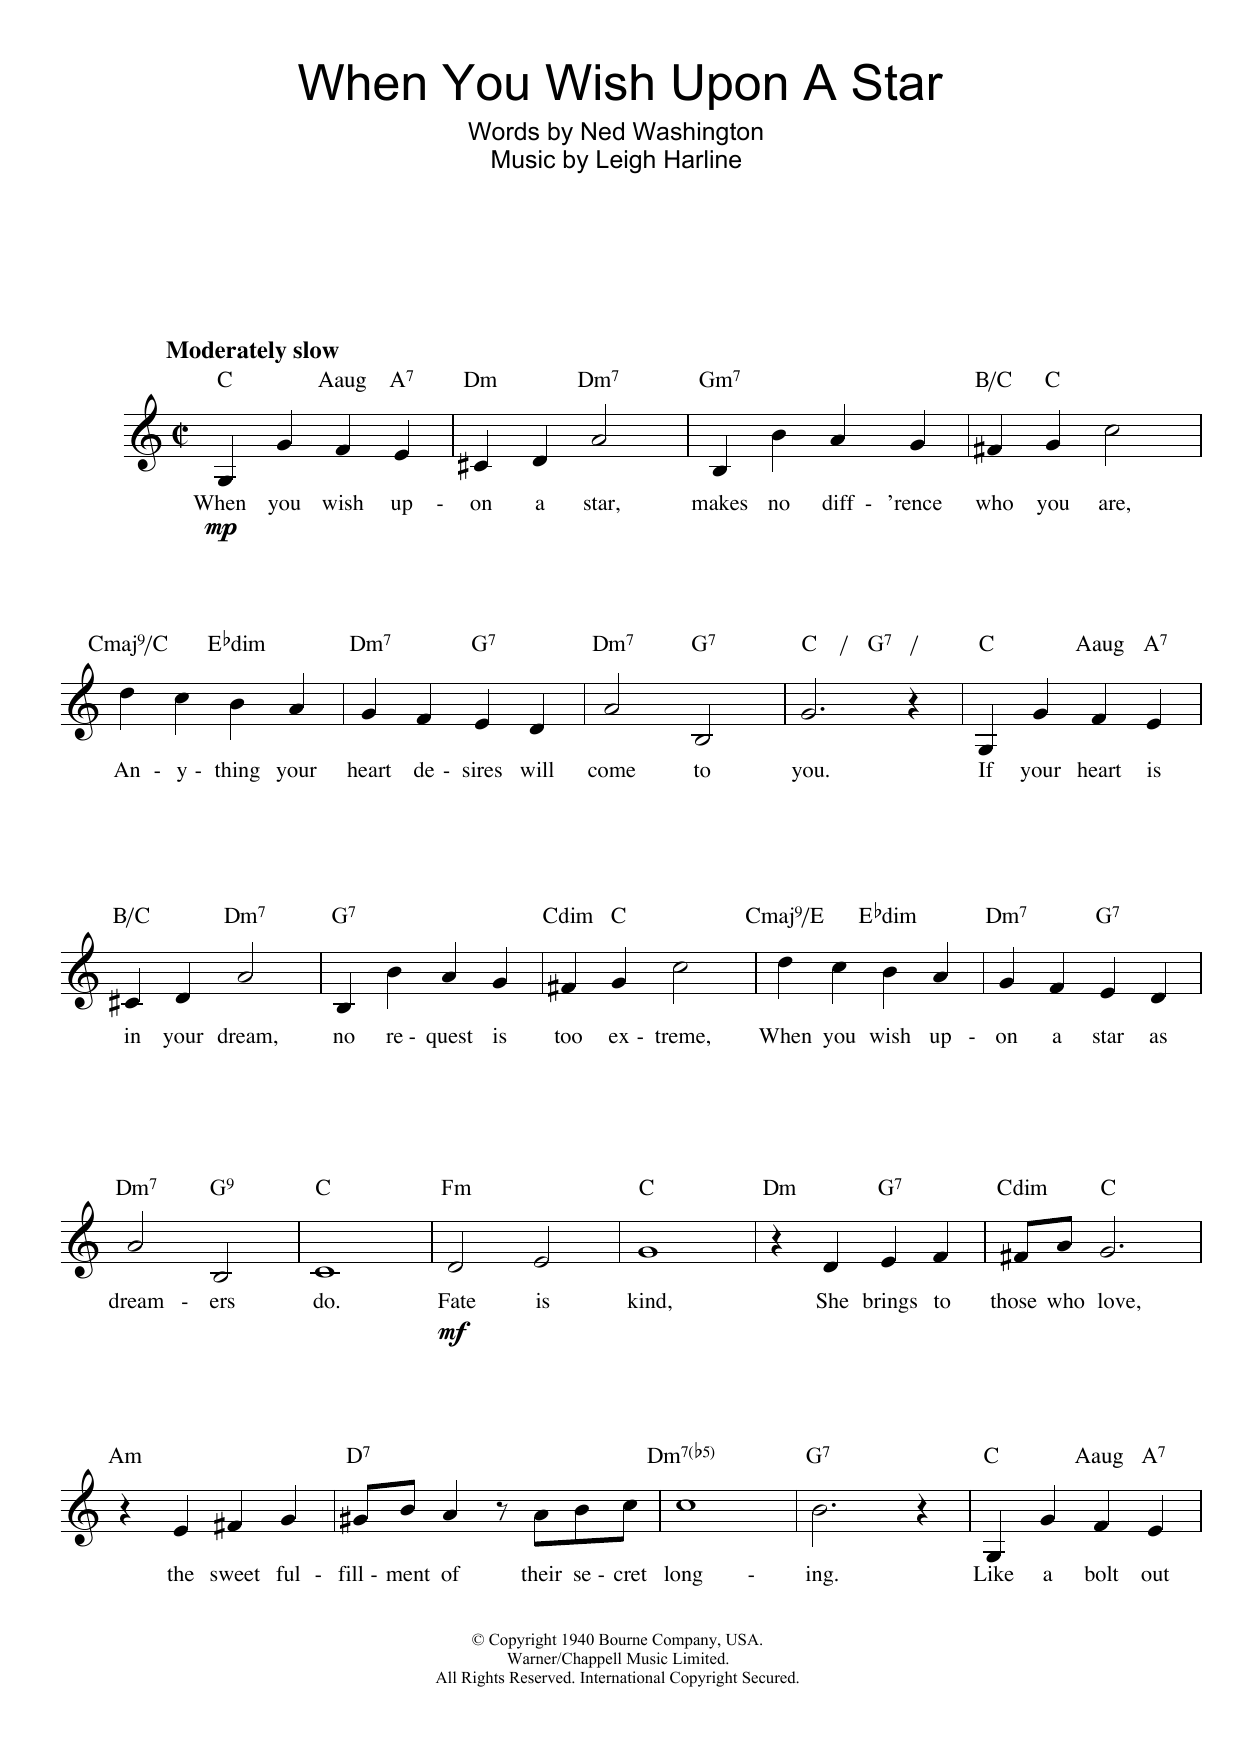 Cliff Edwards When You Wish Upon A Star sheet music notes and chords. Download Printable PDF.